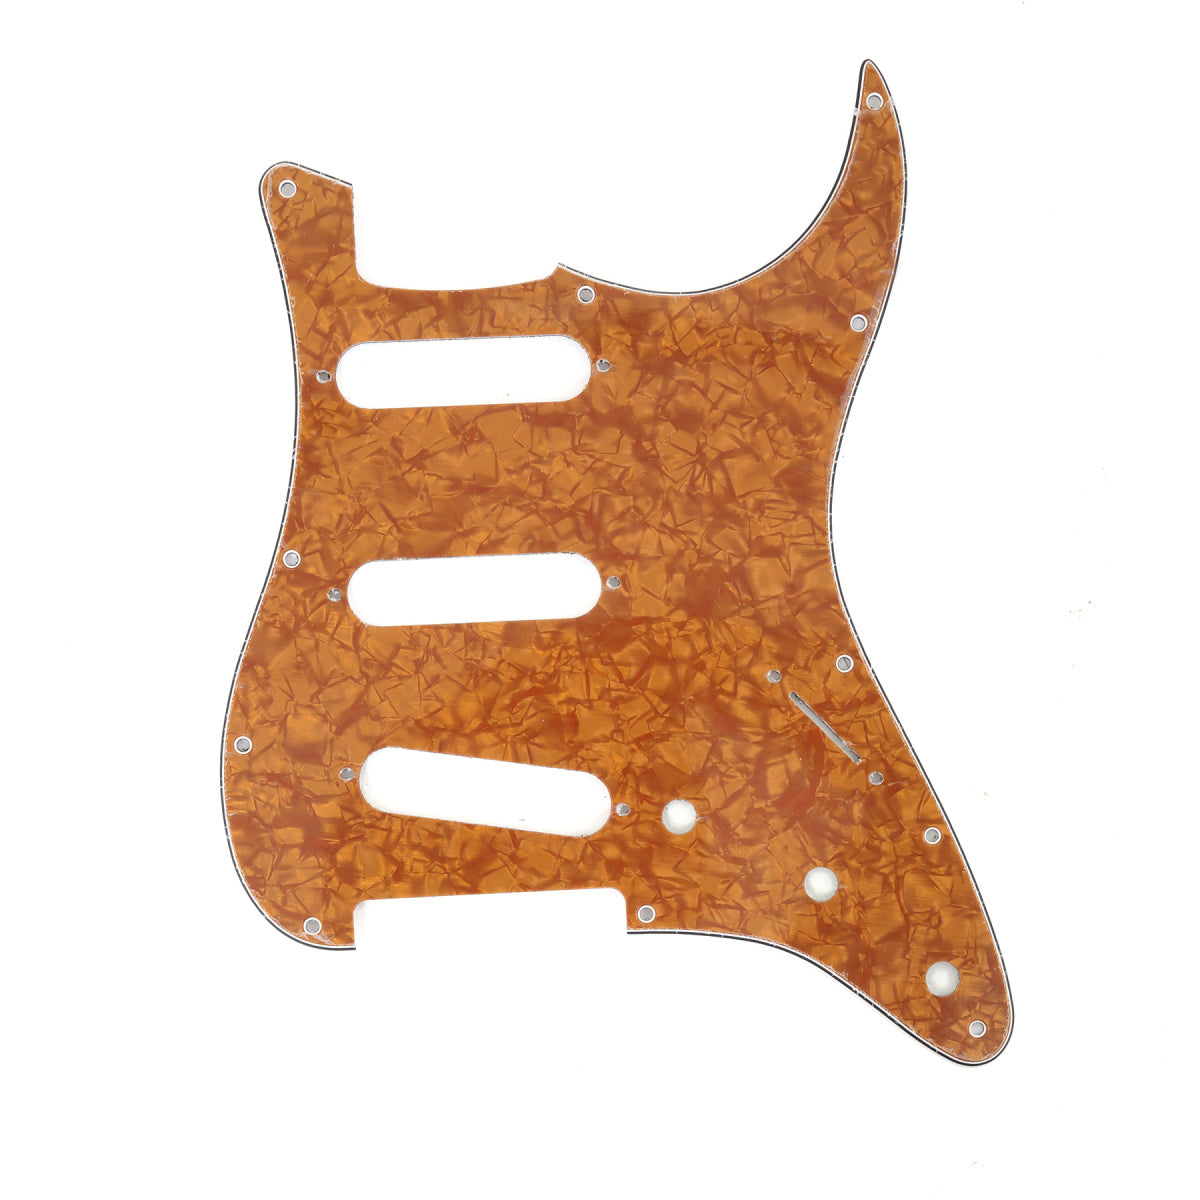 Musiclily SSS 11 Hole Strat Guitar Pickguard for Fender USA/Mexican Made Standard Stratocaster Modern Style, 4Ply Earthy Yellow Pearl